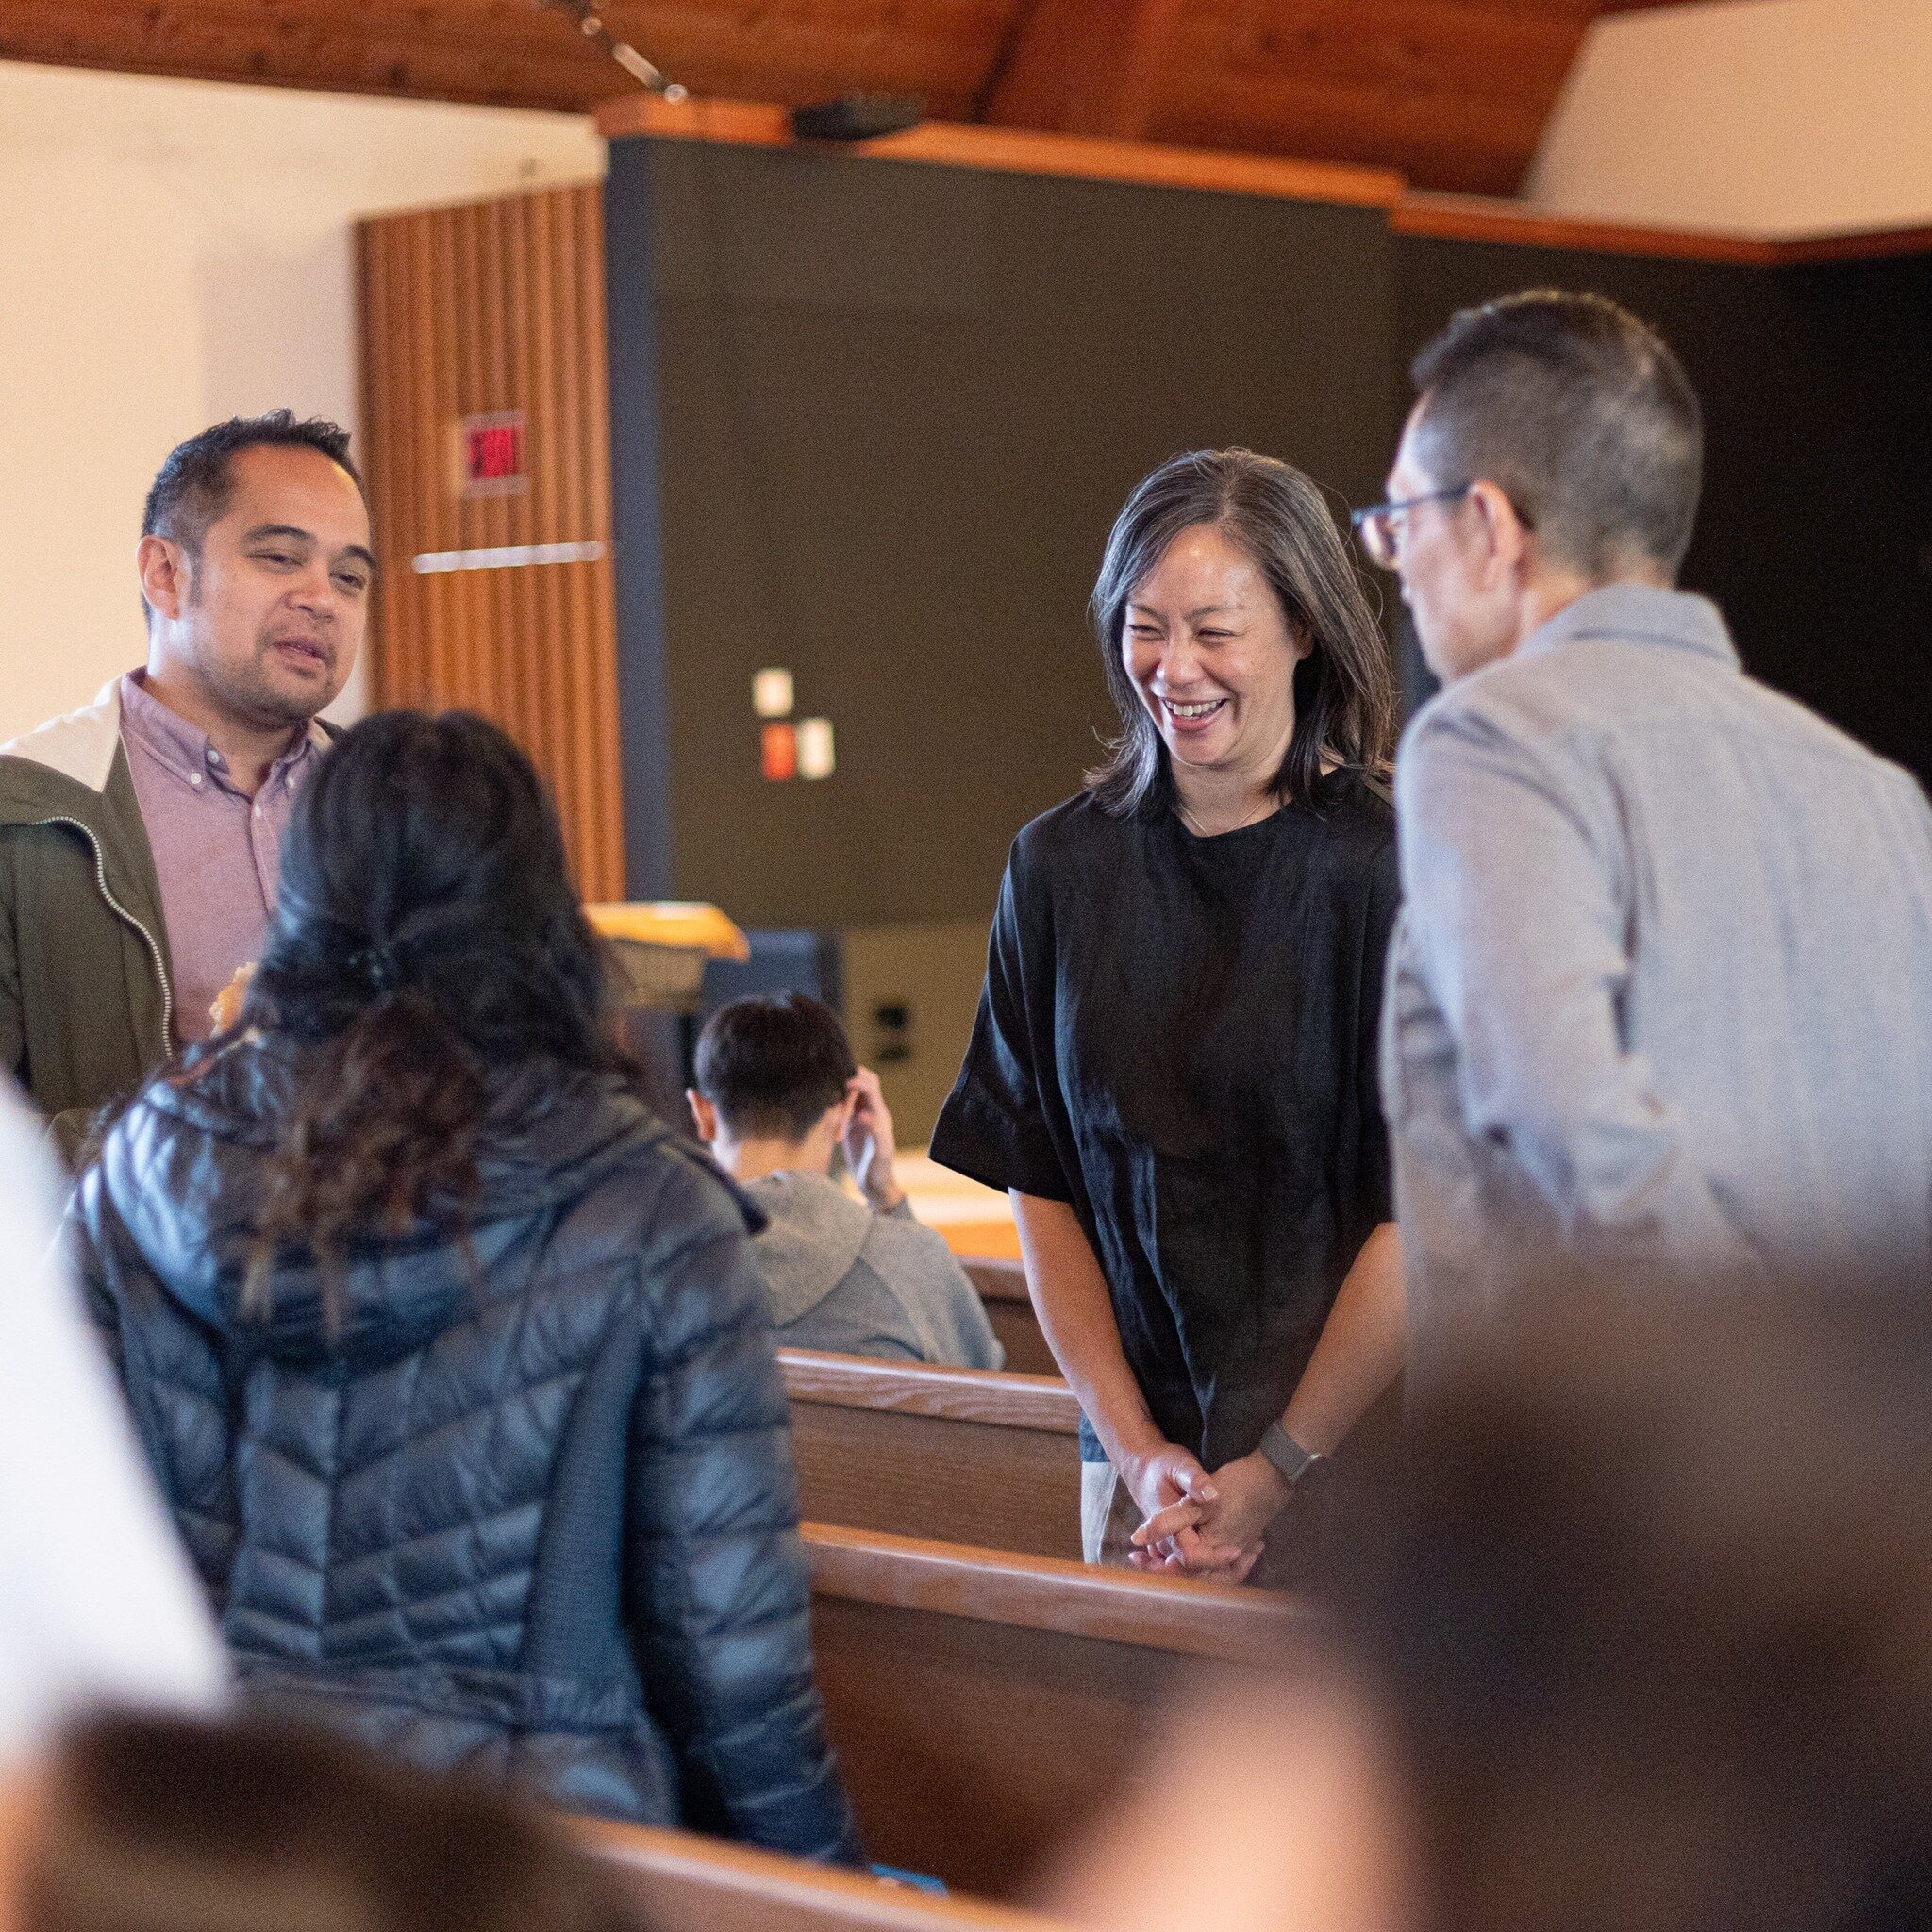 We look forward to seeing you tomorrow morning!

+ Sunday, March 17th @ 9 + 11AM
+ Midtown Church (6060 Culloden St, Vancouver)

Kids ministry available during the 9AM gathering.

#midtown #midtownchurch #vancouver